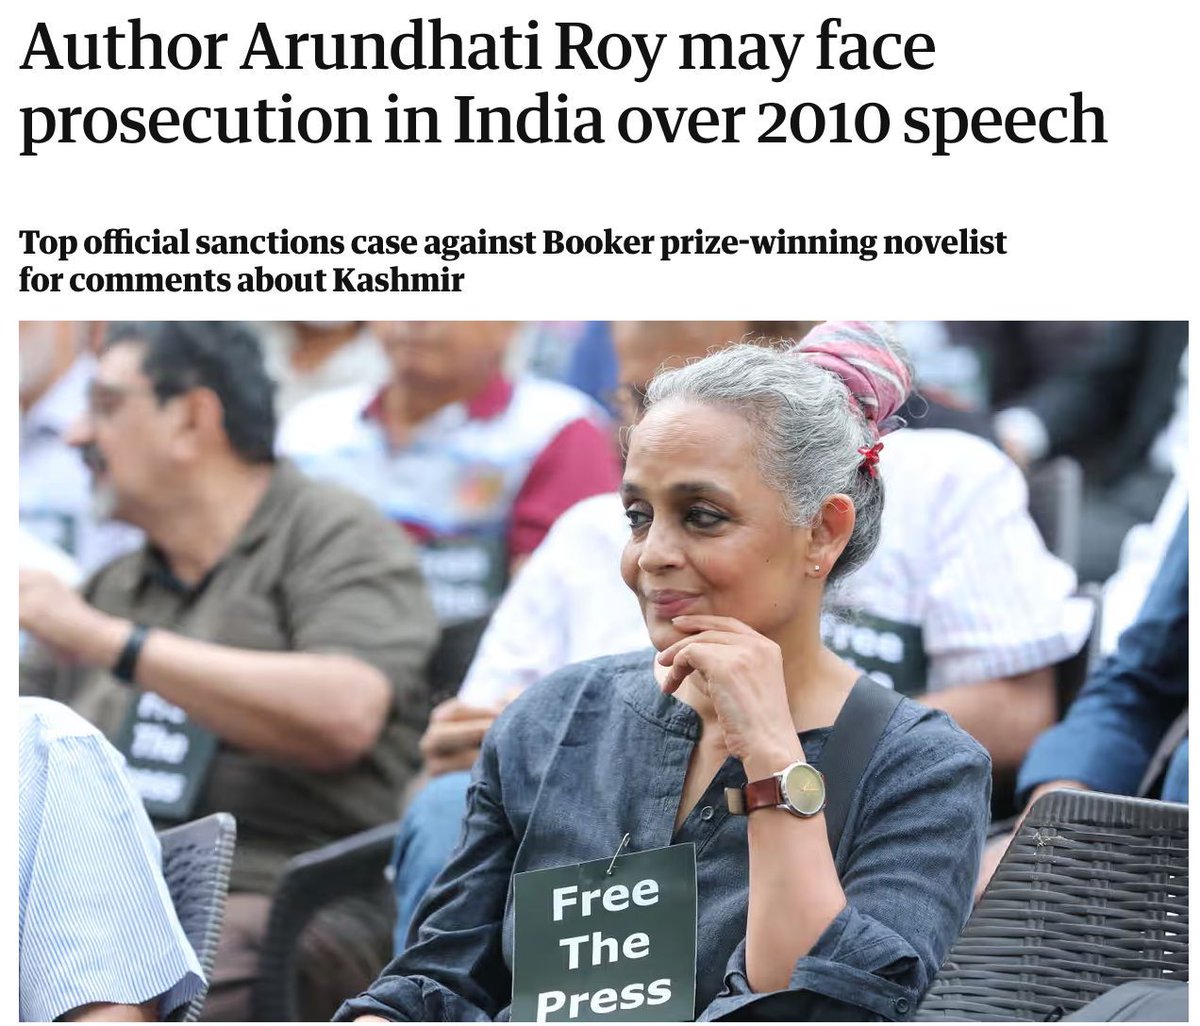 The Modi gov is going after Arundhati Roy, as India is once again being 'accused by rights groups and others of targeting activists for criminal prosecution and working to suppress free speech' theguardian.com/books/2023/oct…